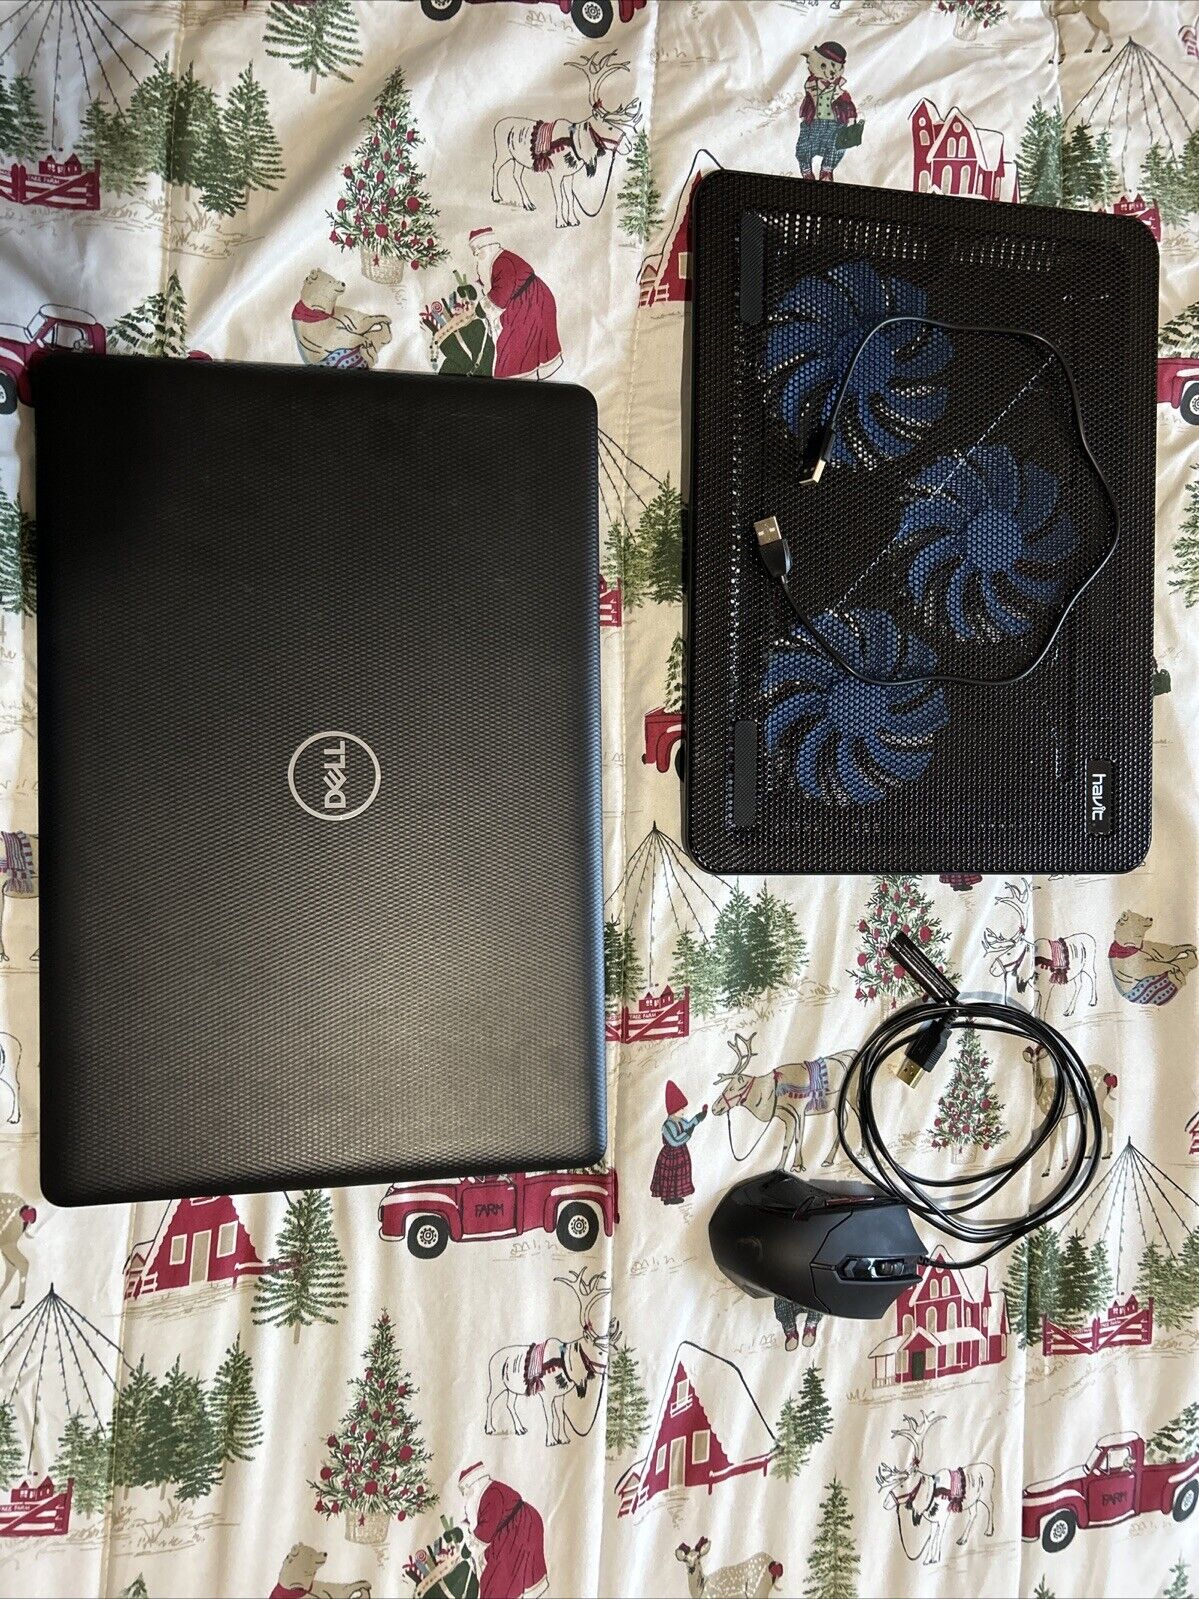 Dell Inspiron 3780 Intel Core i7 16.0 GB + Laptop Cooling Pad + MSI Gaming Mouse